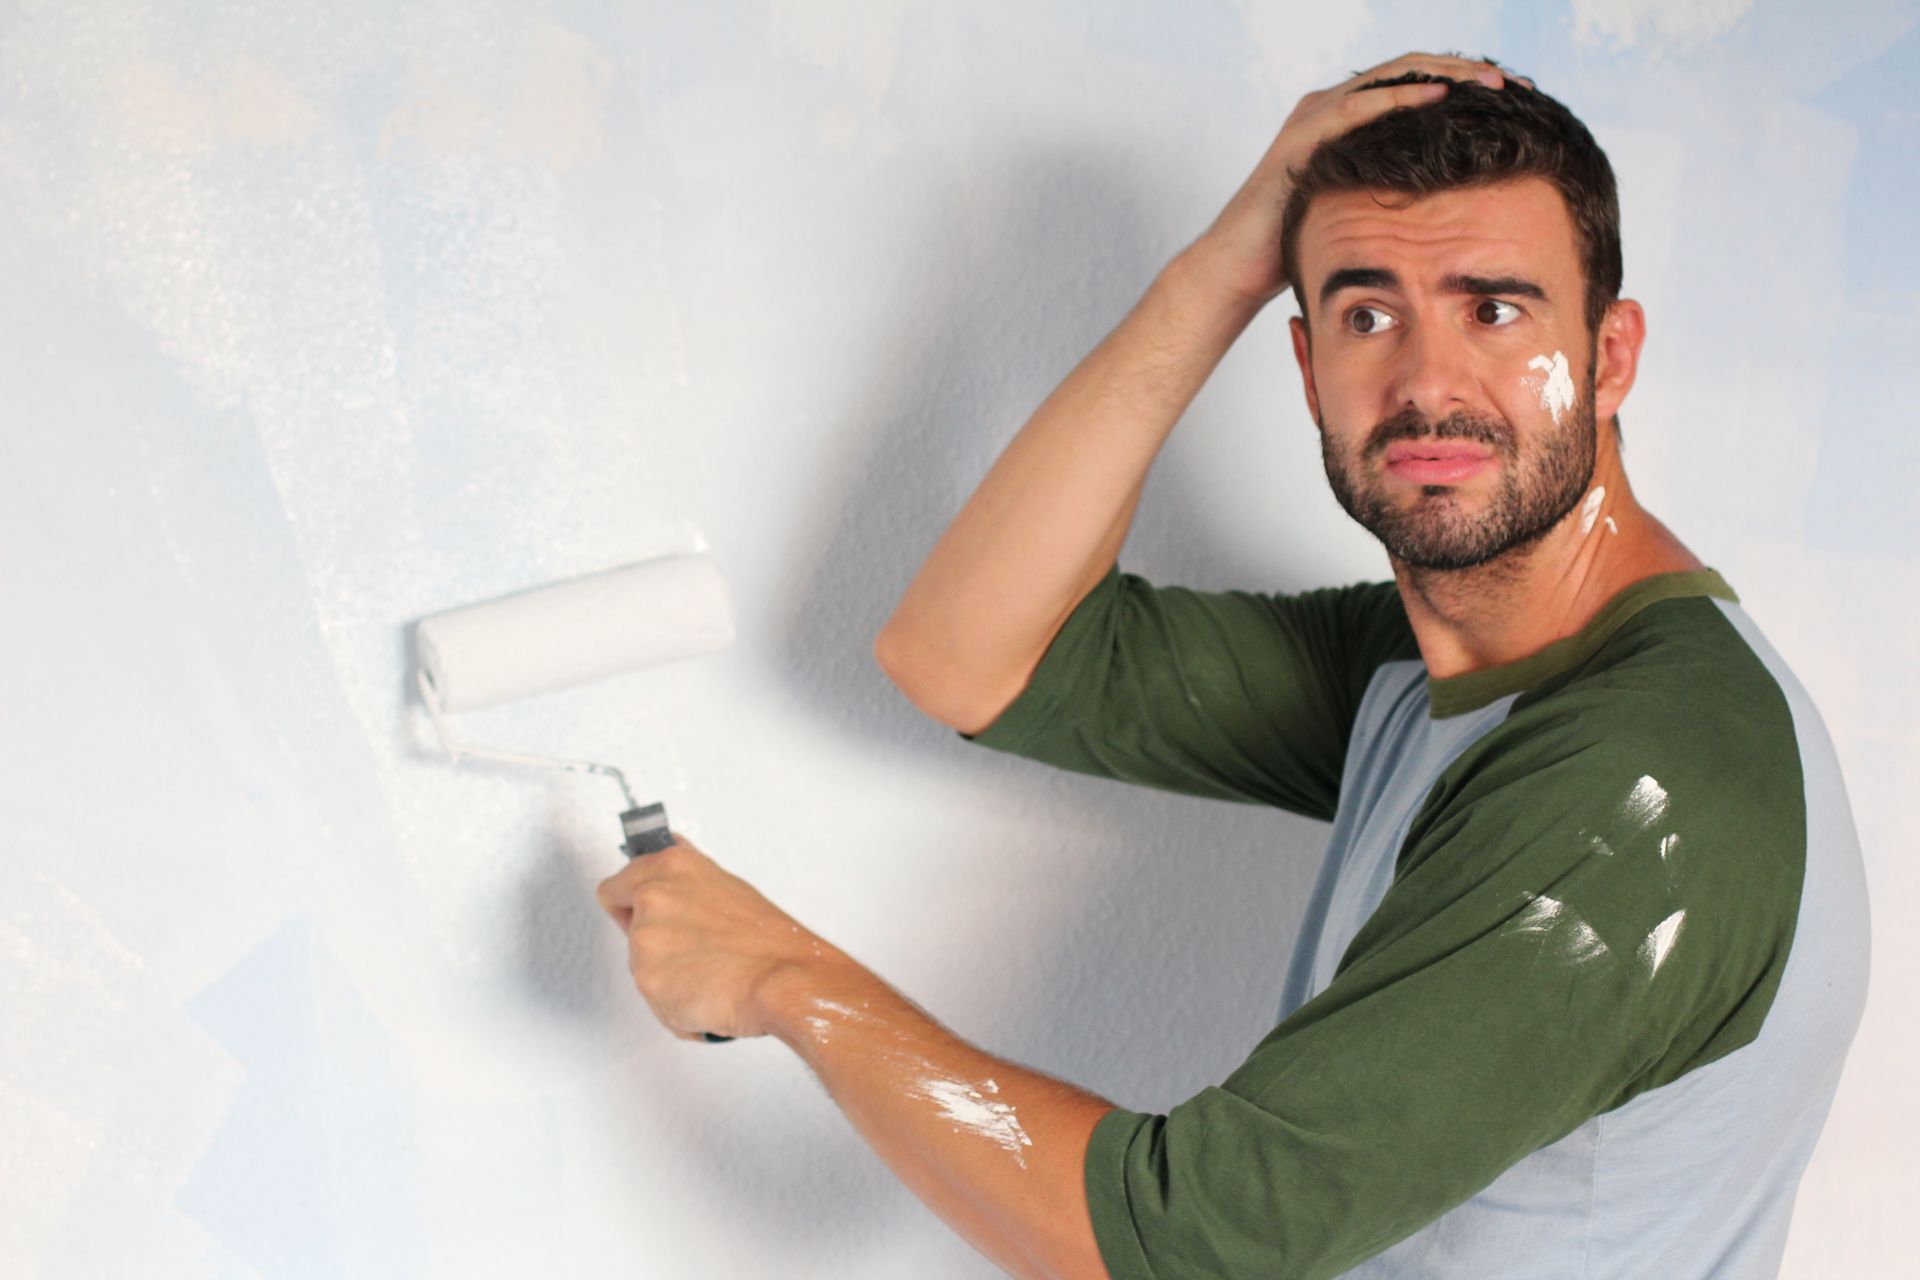 a man is painting a wall with a roller and making a funny face